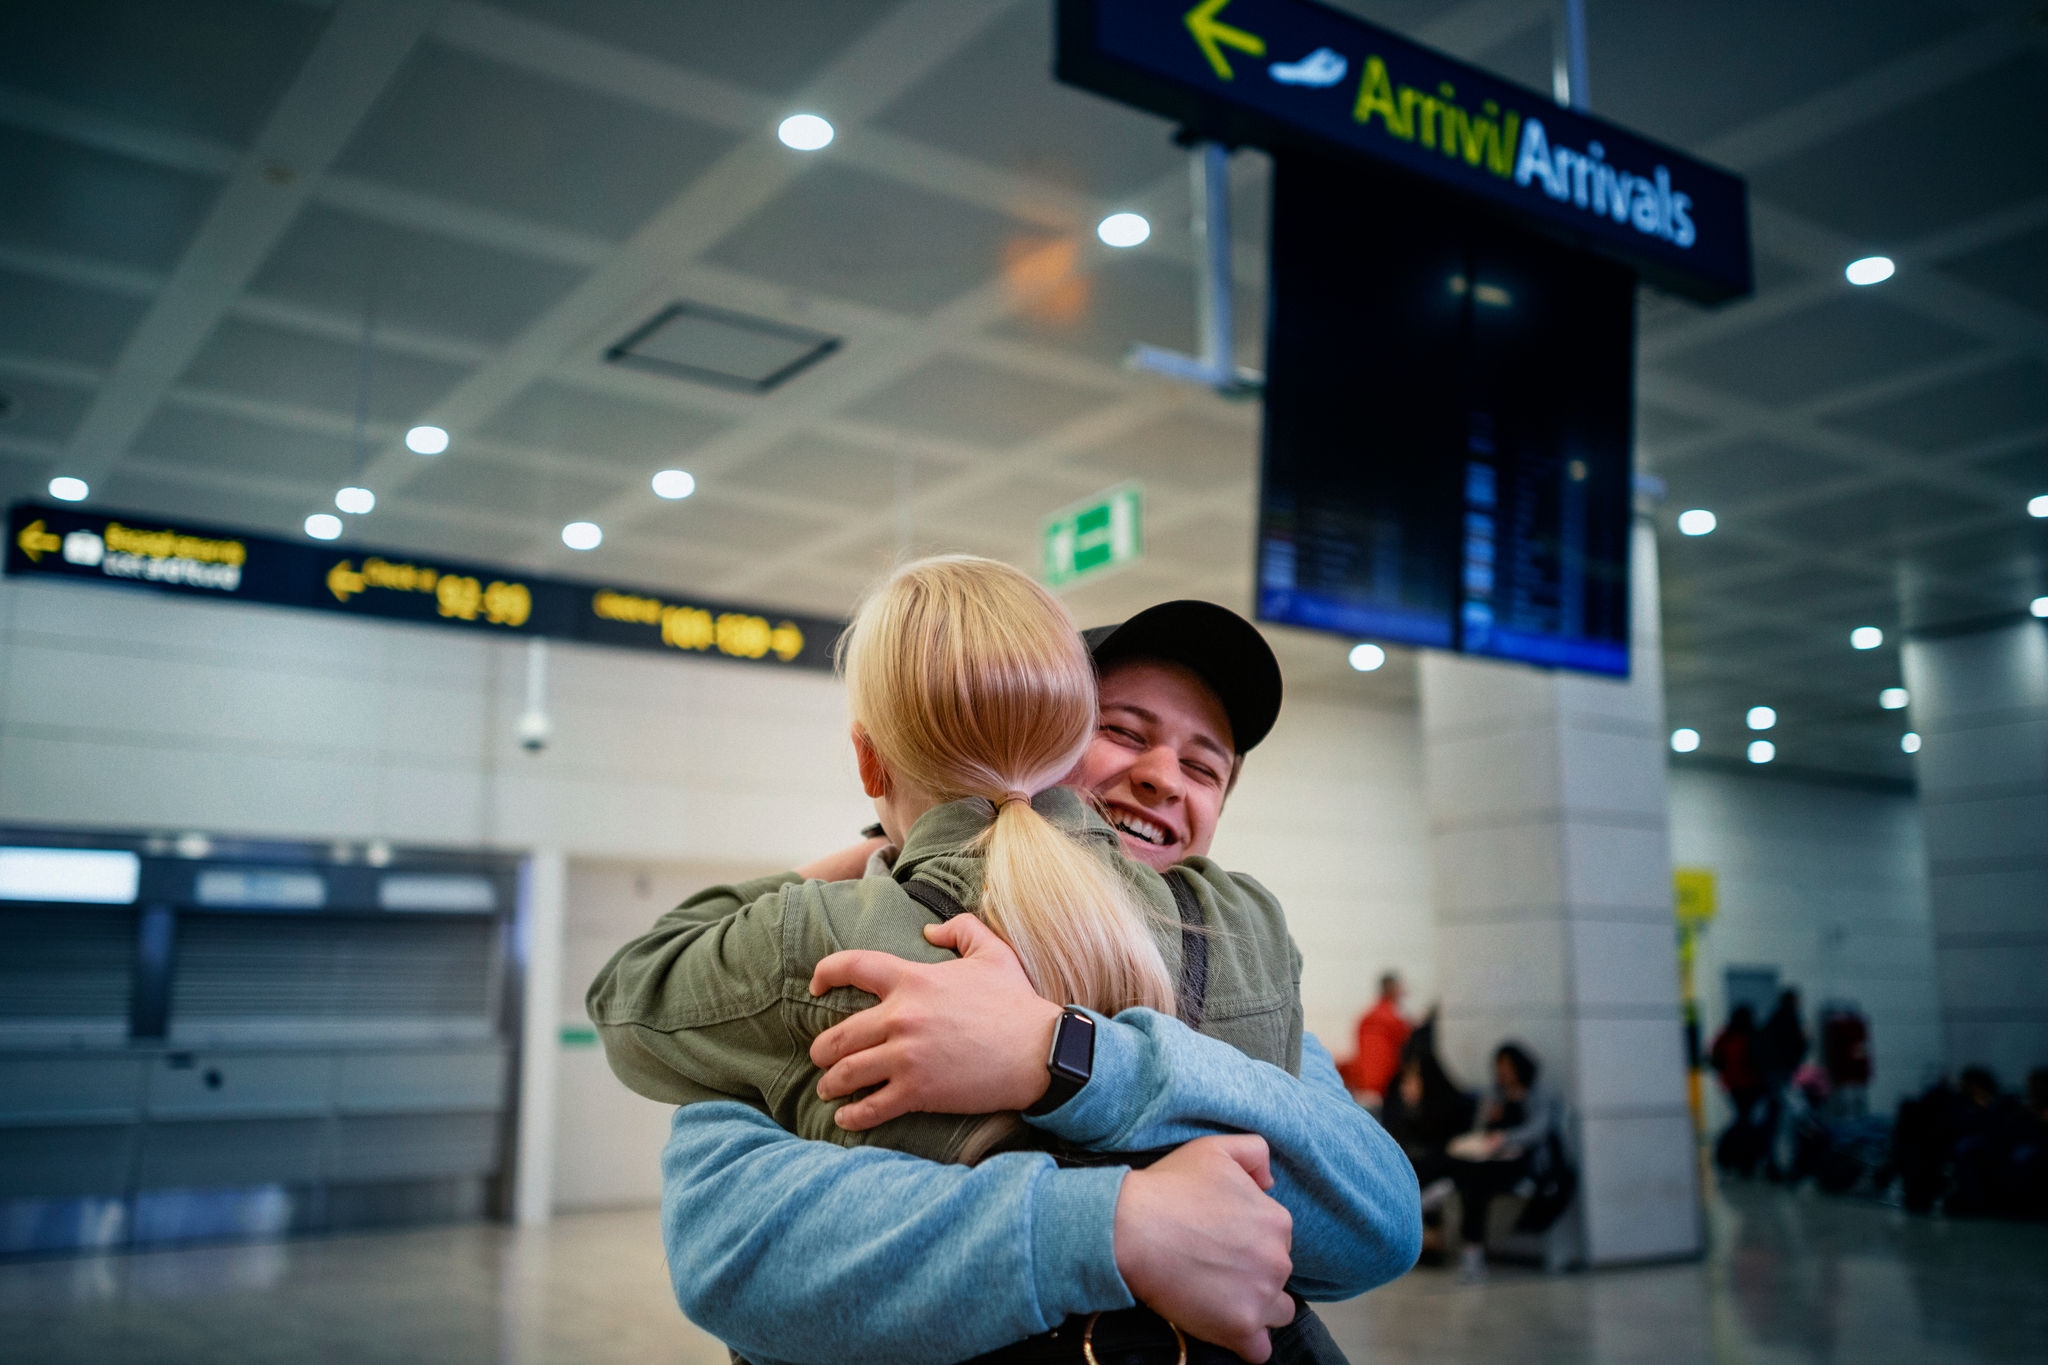 A young woman is hugging her boyfriend upon arrival in the airport